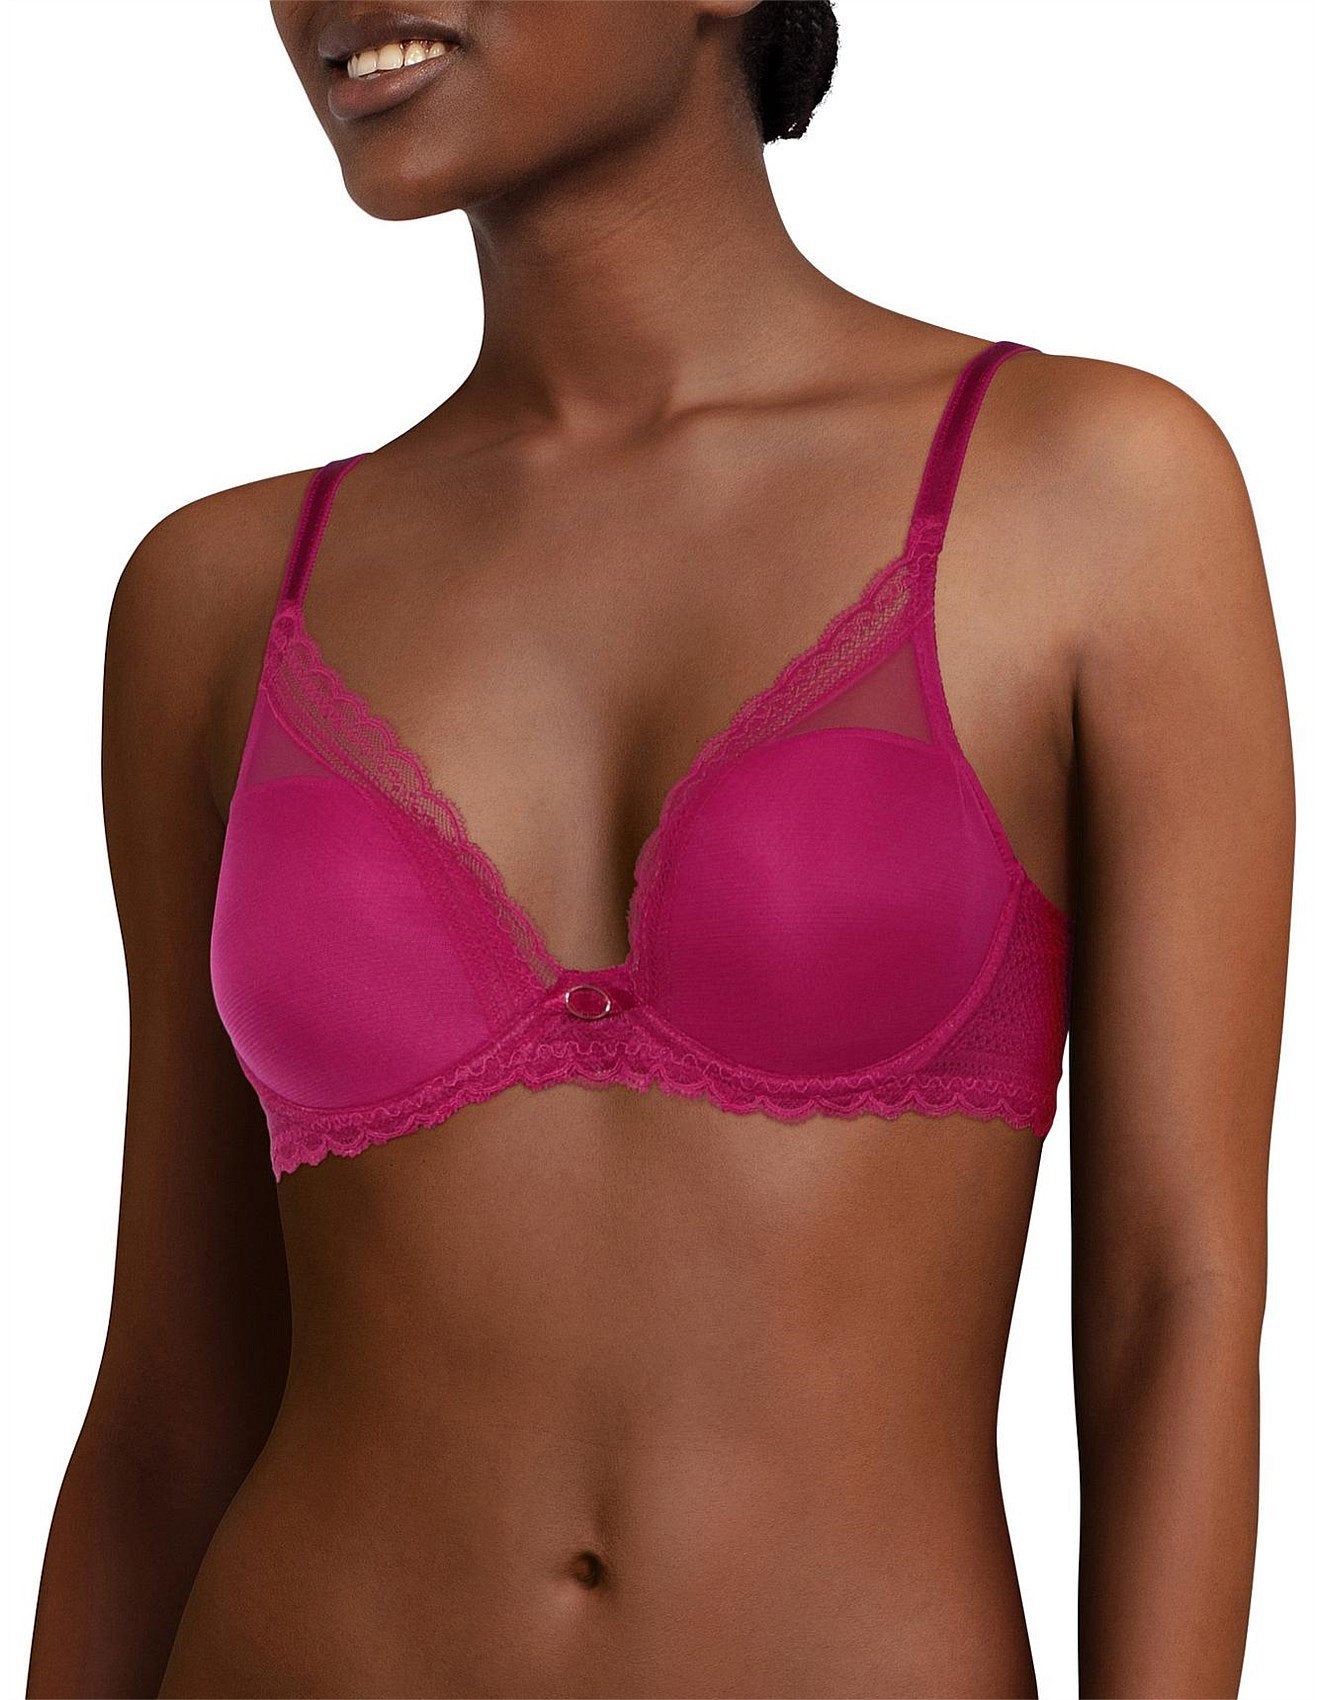 Chantelle Parisian Allure C22320 - Underwire Bra Ruby / 10B  Available at Illusions Lingerie